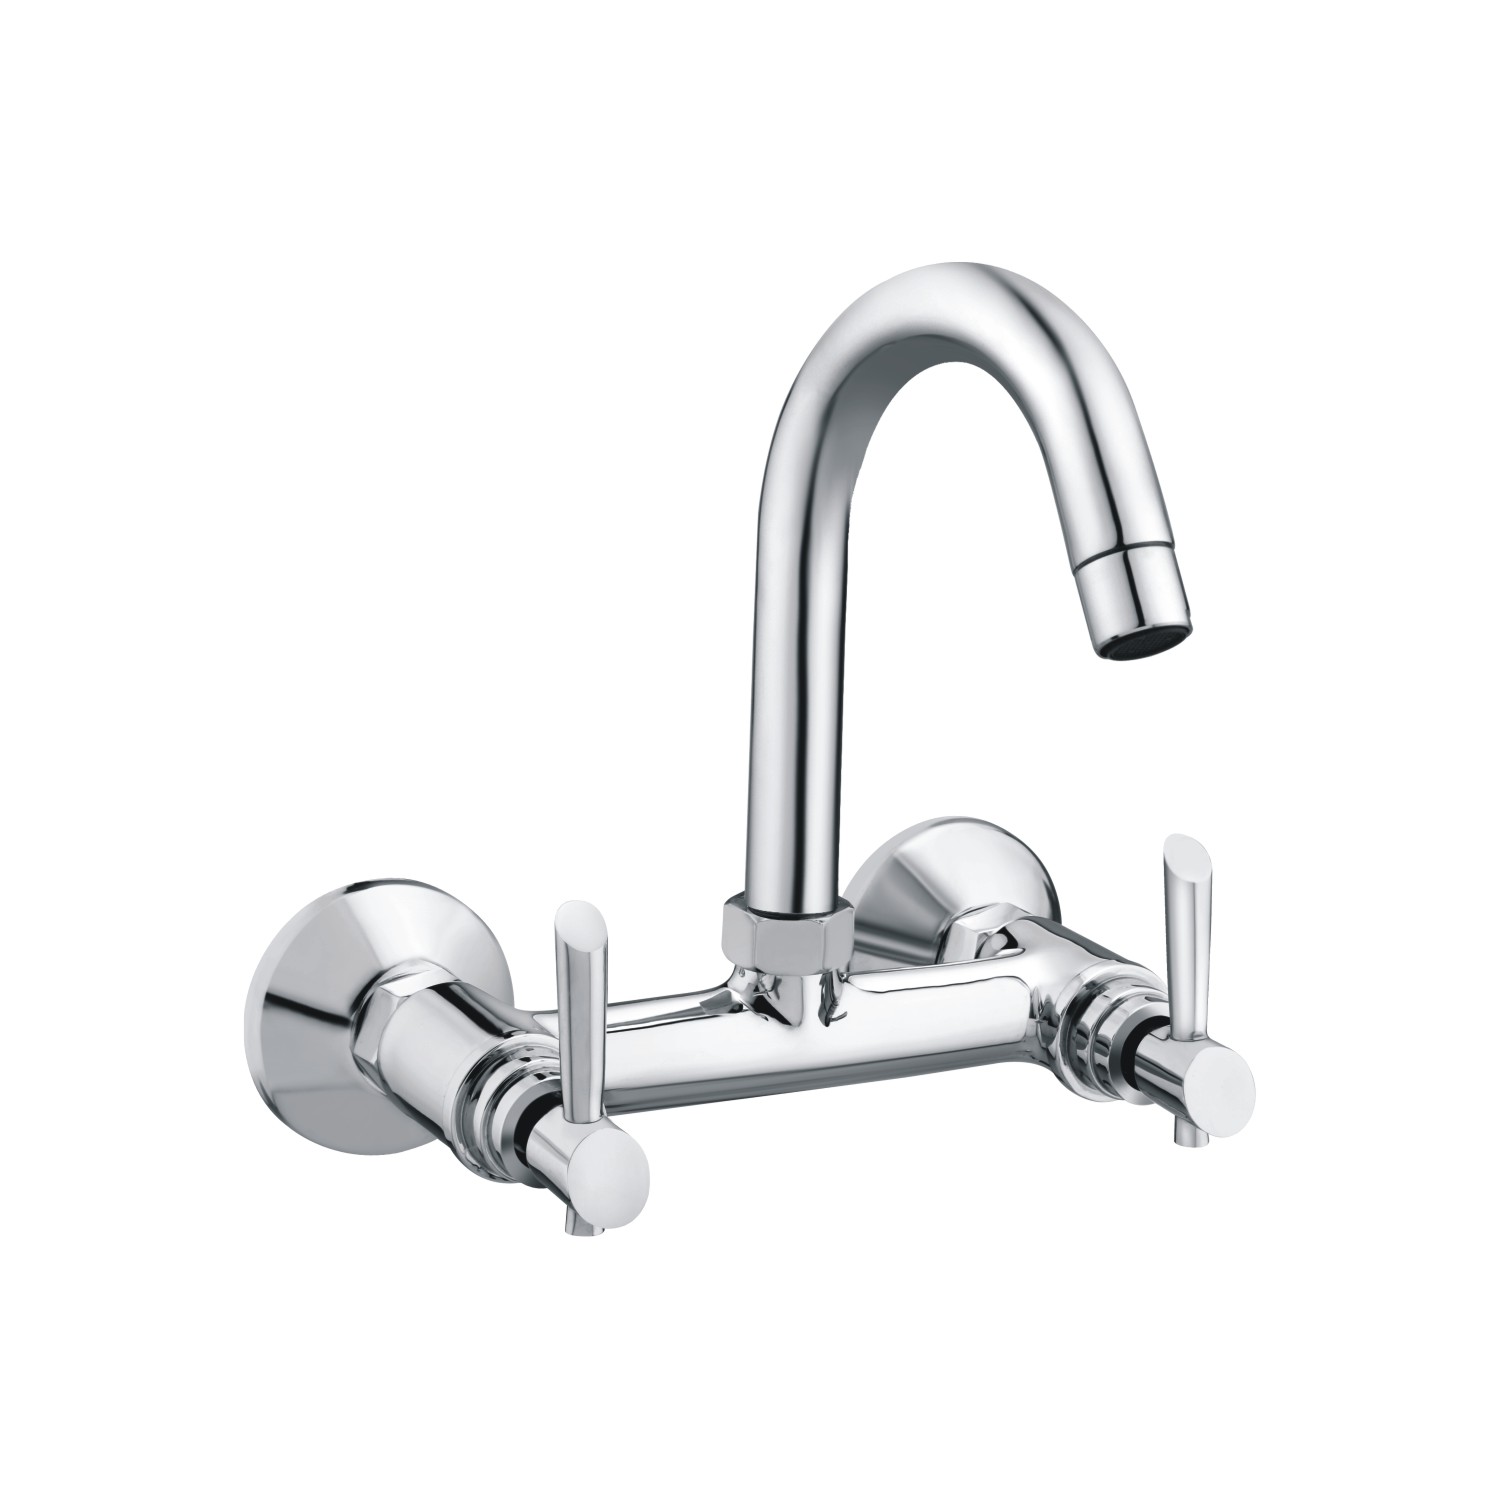 Fusion Sink Mixer with Swivel Spout